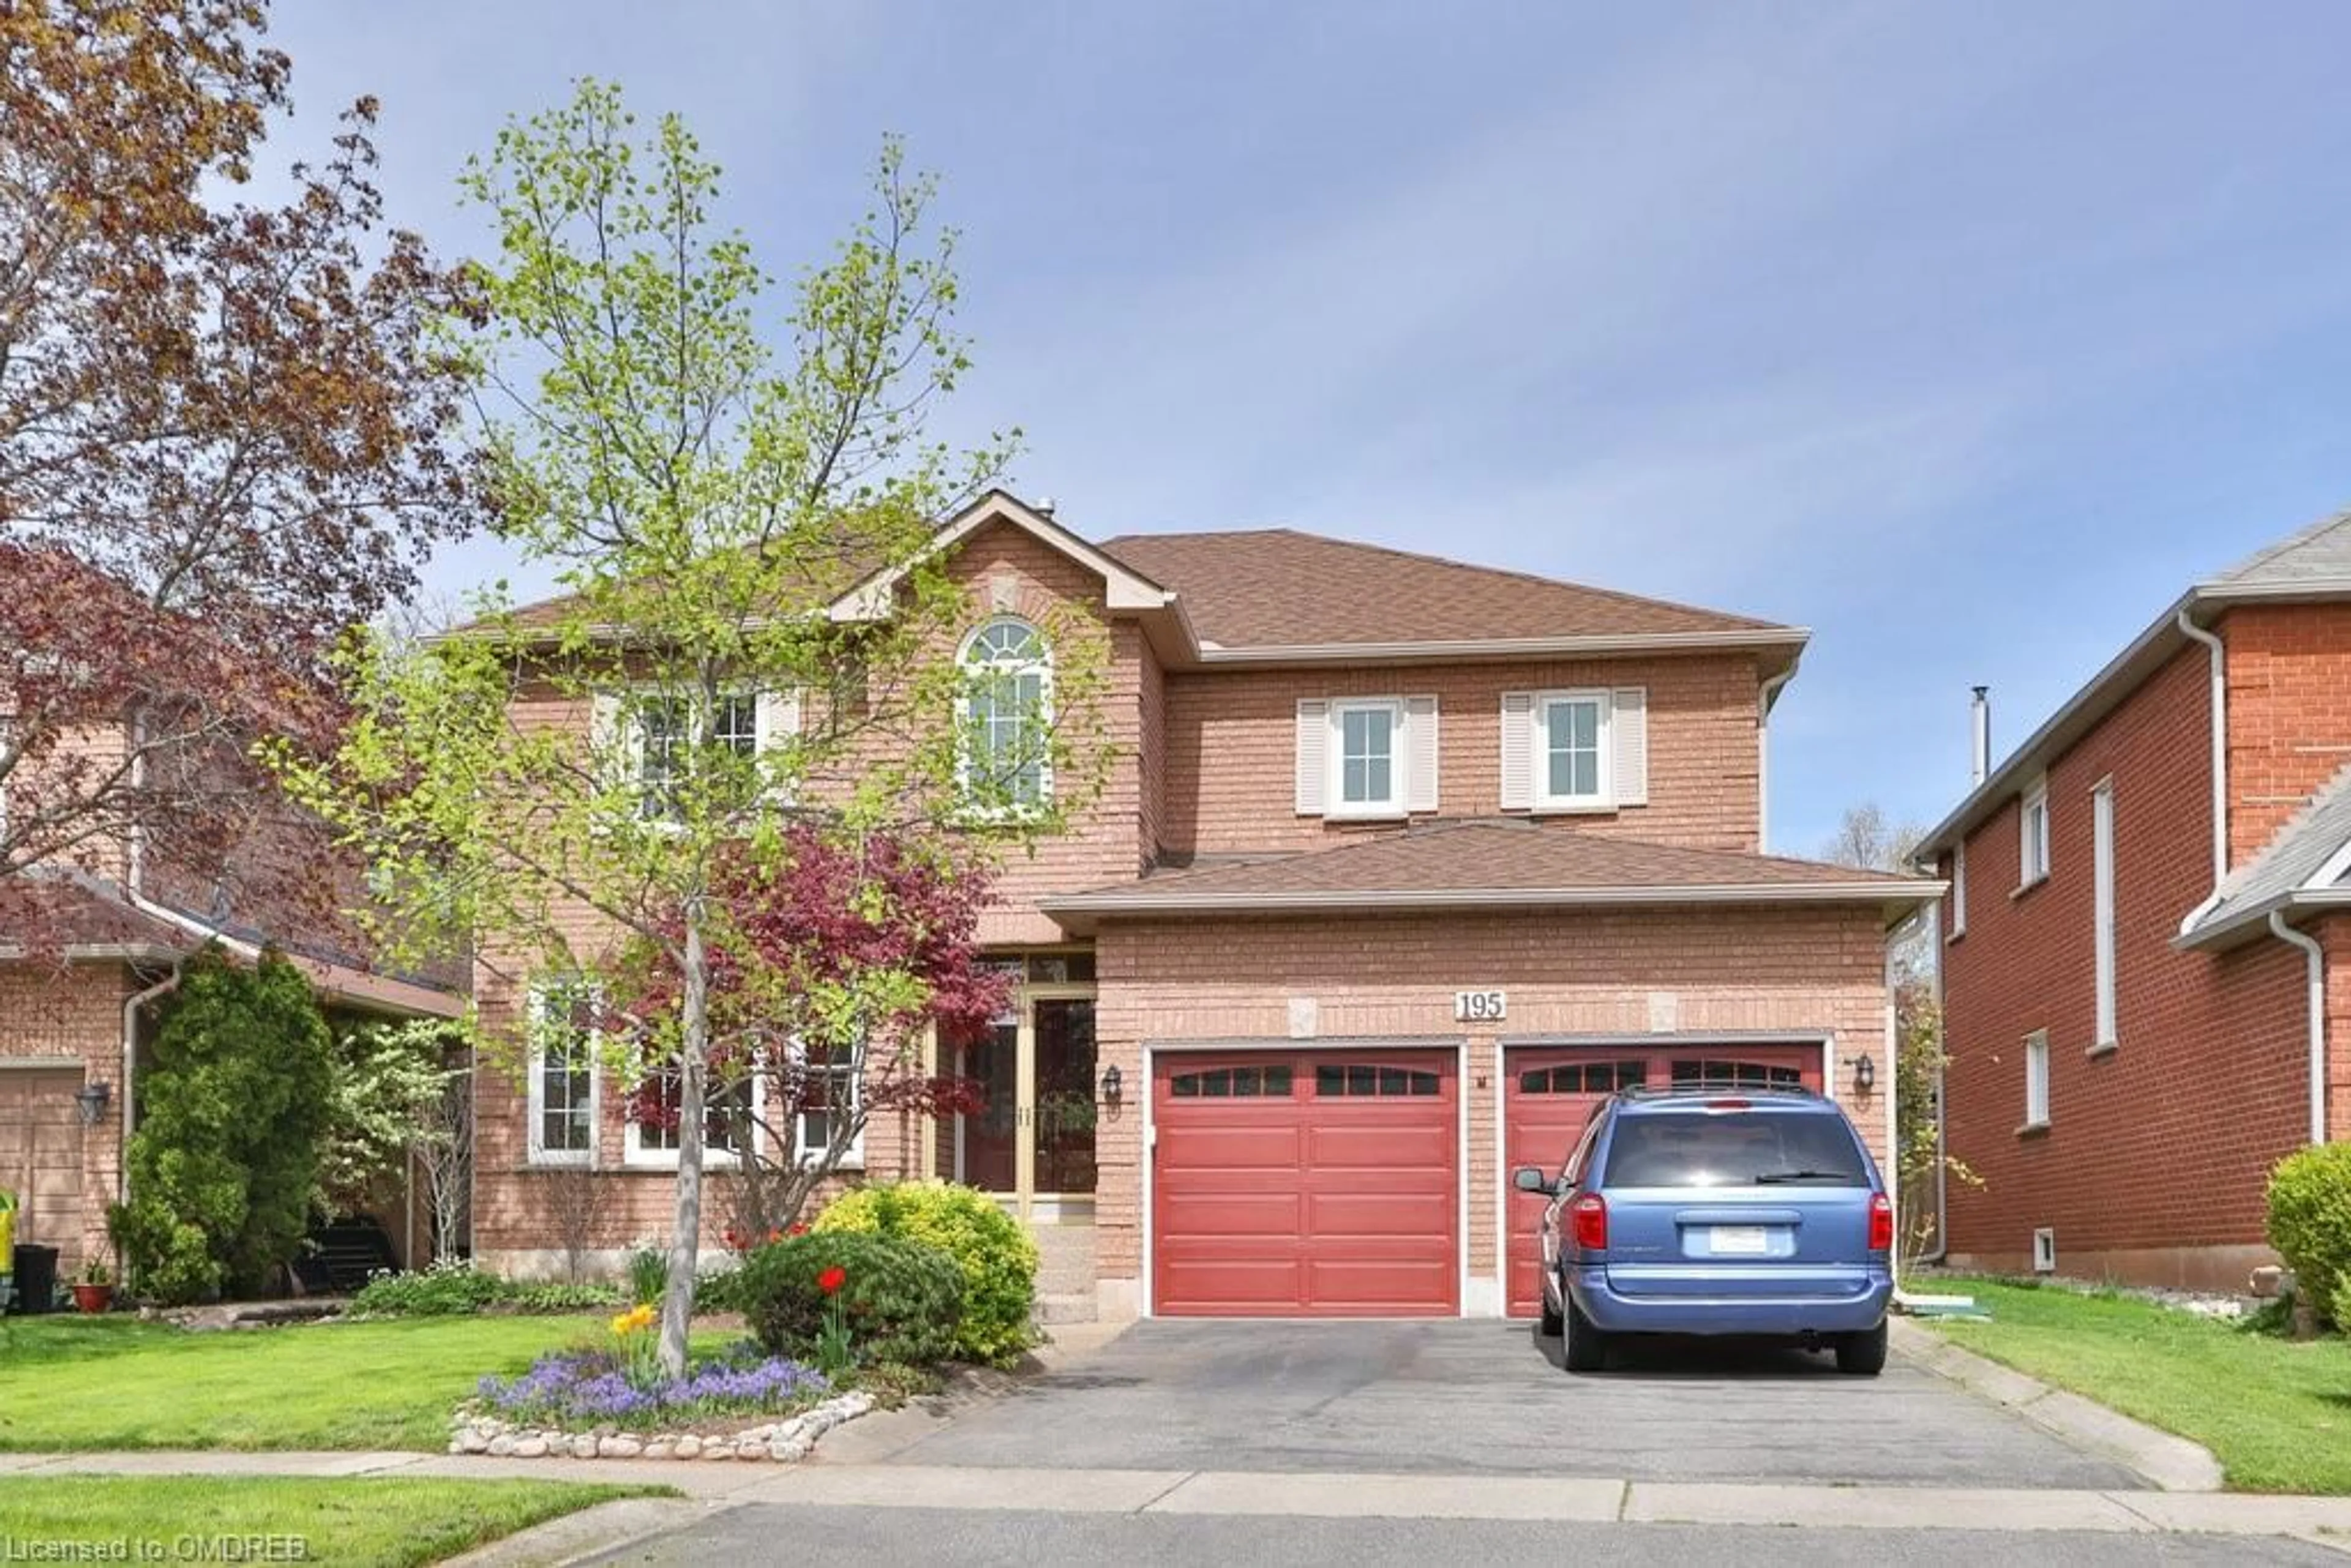 Home with brick exterior material for 195 Elderwood Trail, Oakville Ontario L6H 5W2